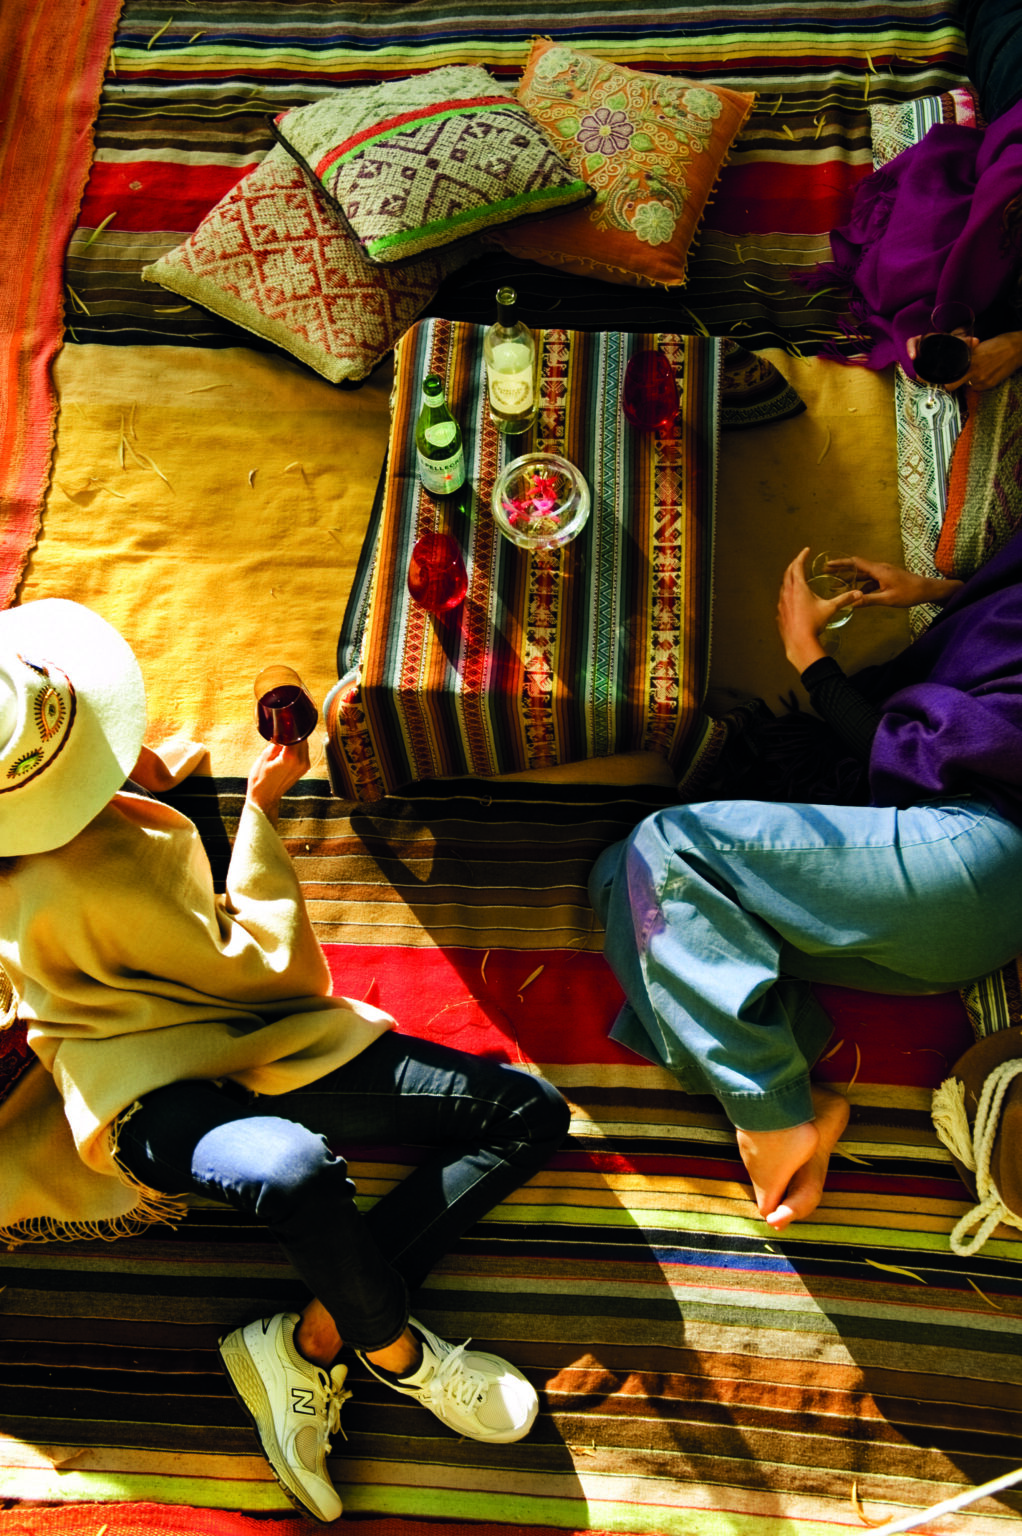 Two people lounging on colorful textiles